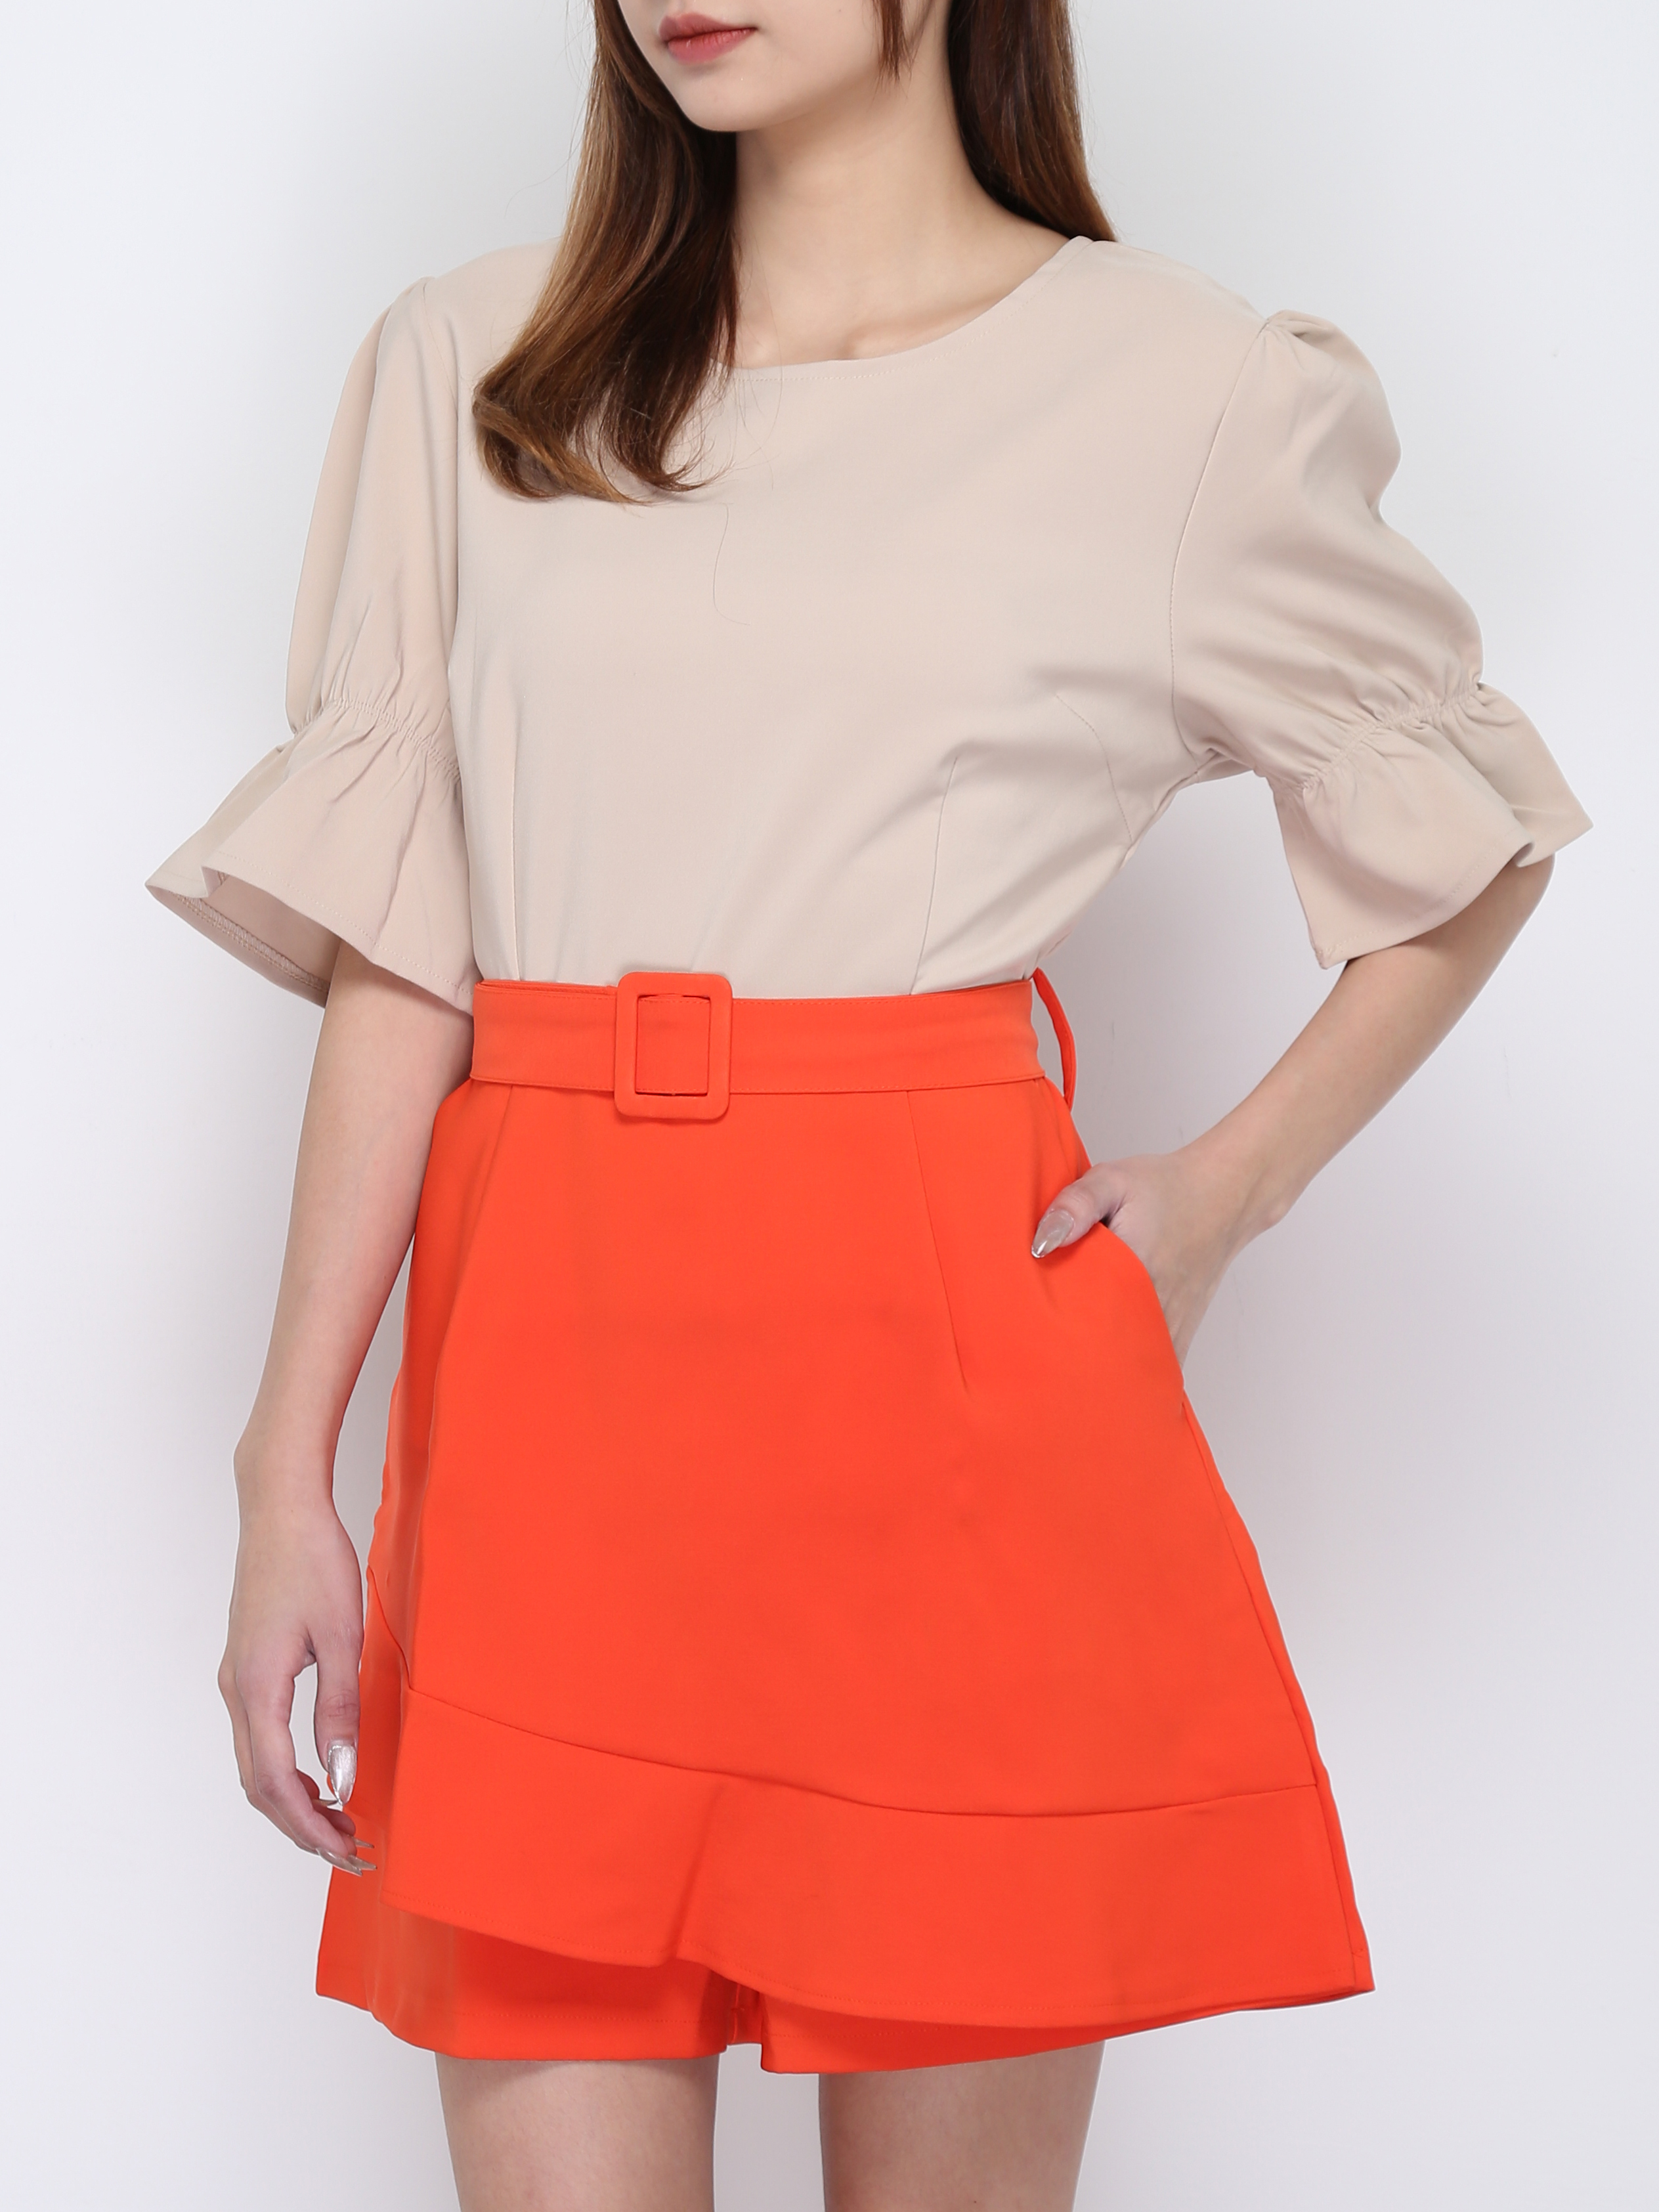 Two Tone With Belt Skirt Pants 16737